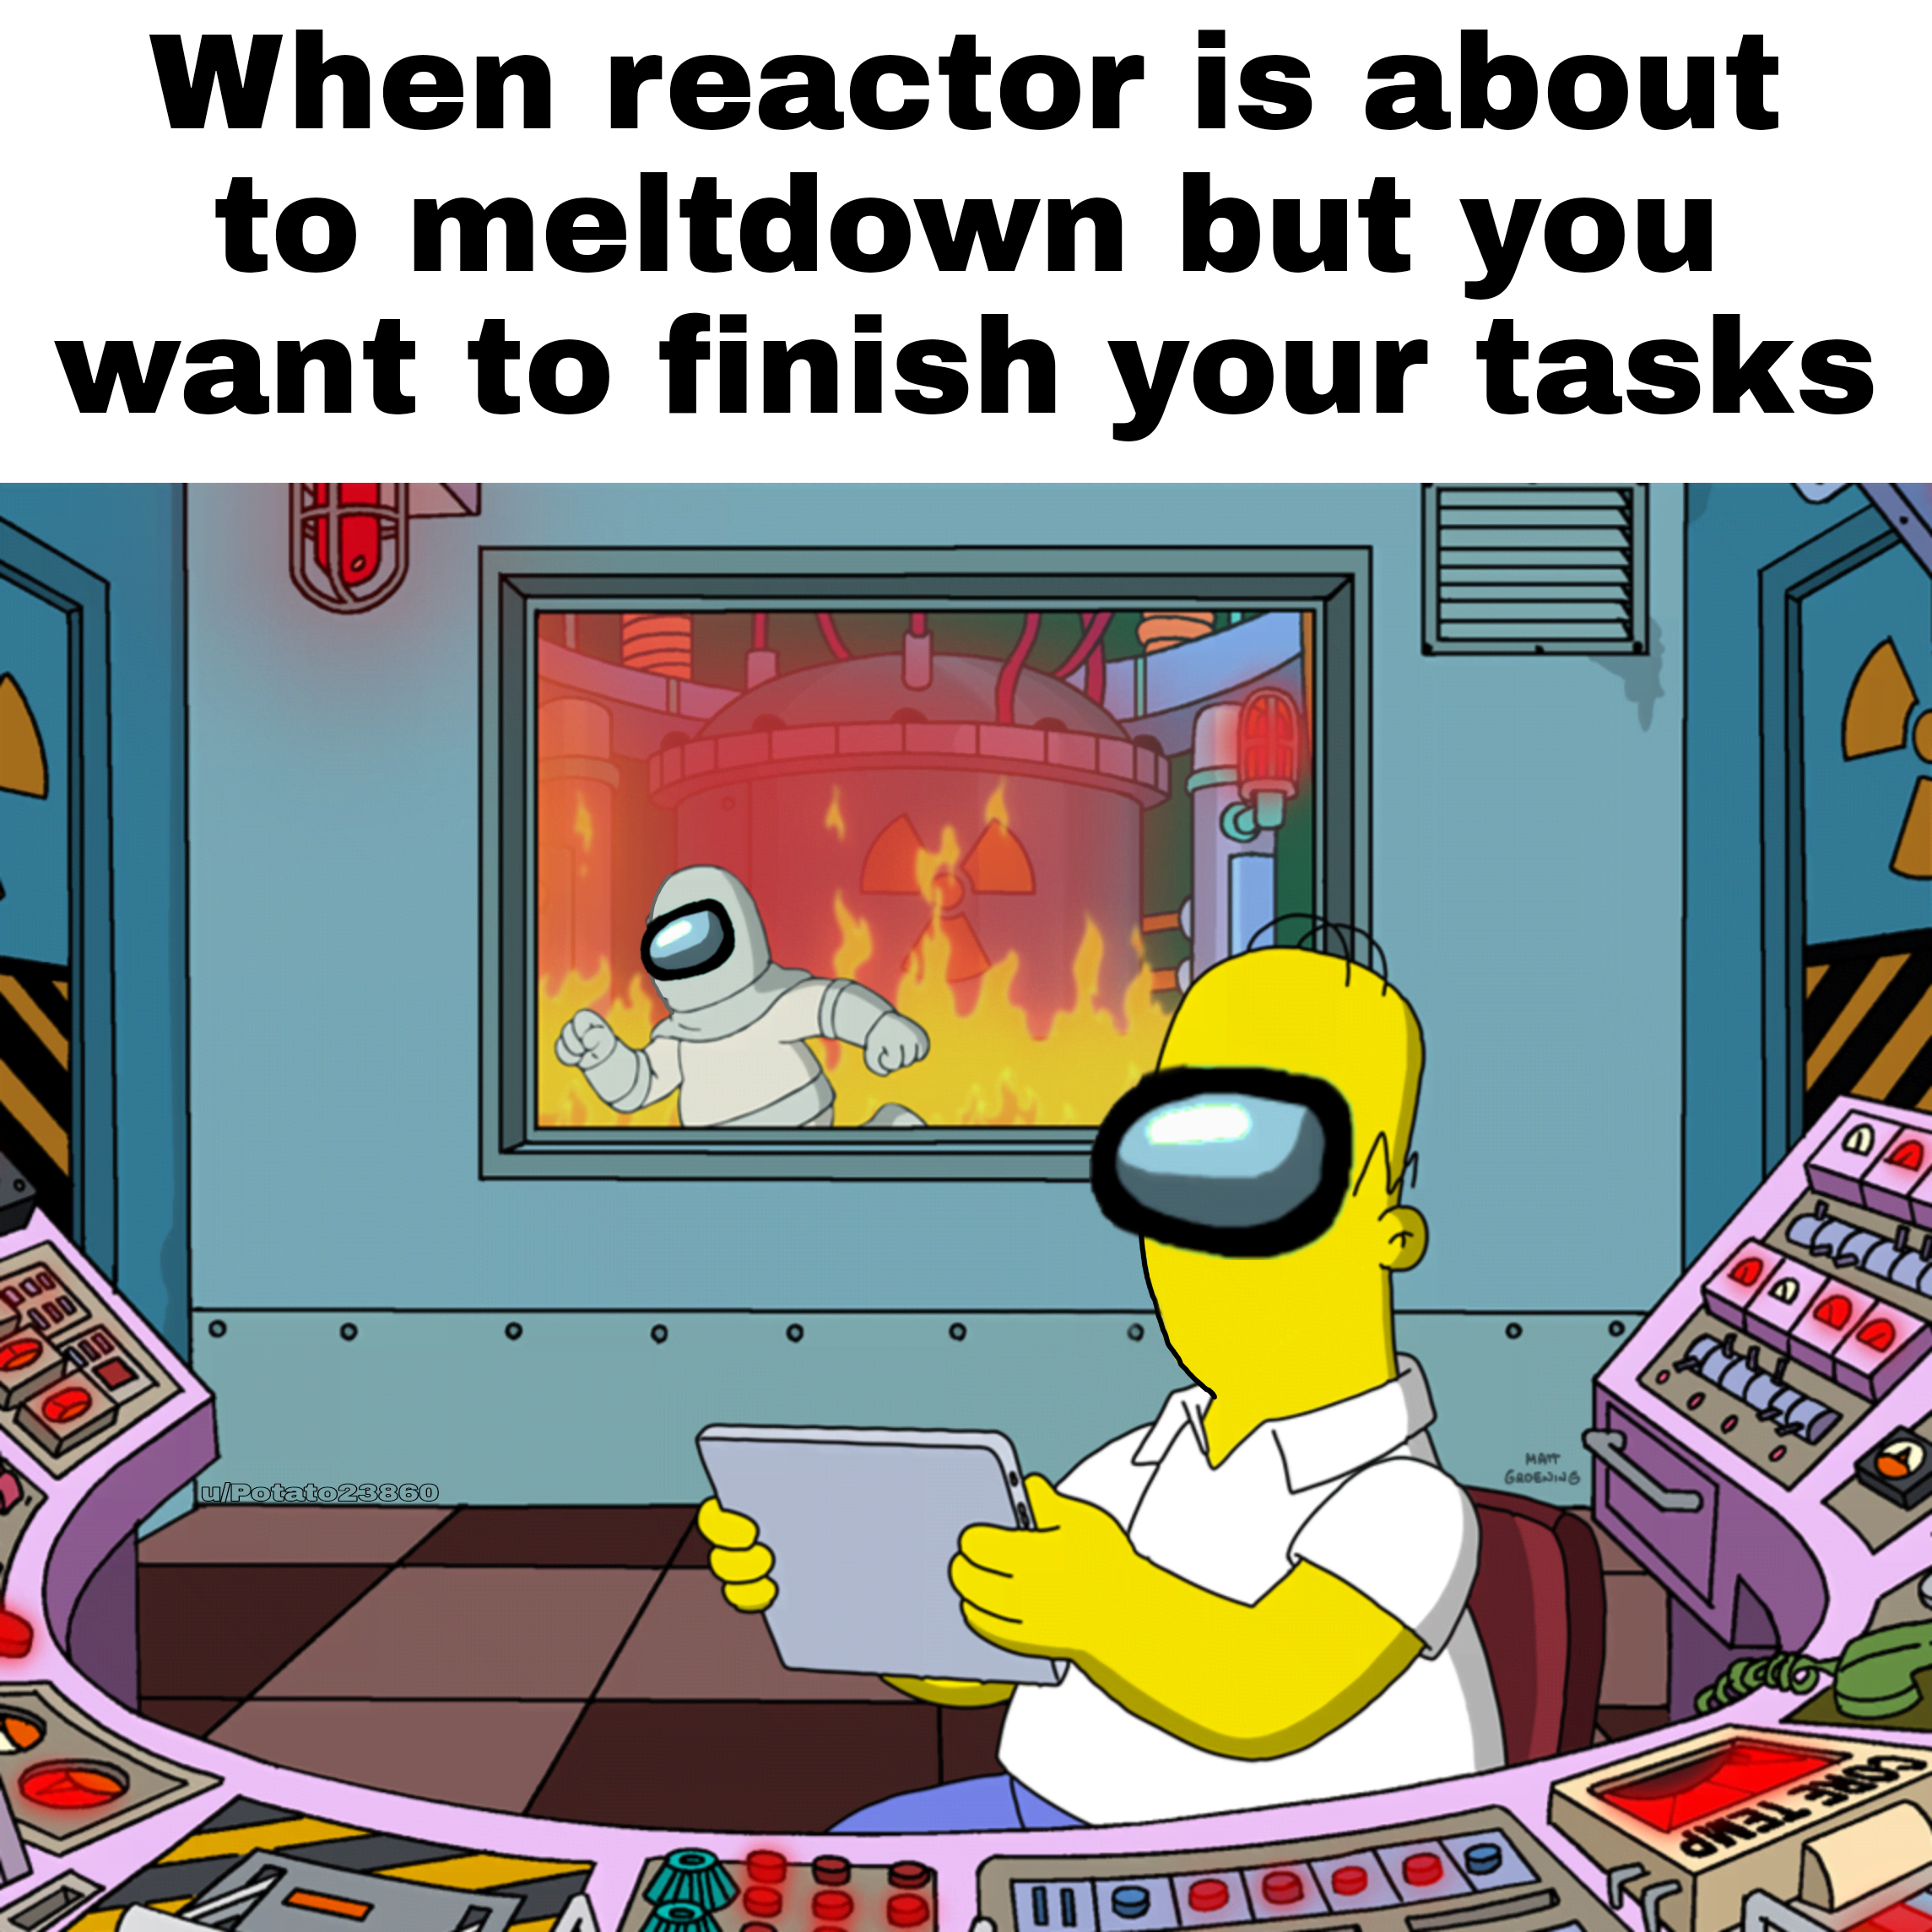 dank memes - homer simpson nuclear power plant - Ge When reactor is about to meltdown but you want to finish your tasks Ve Pac loll